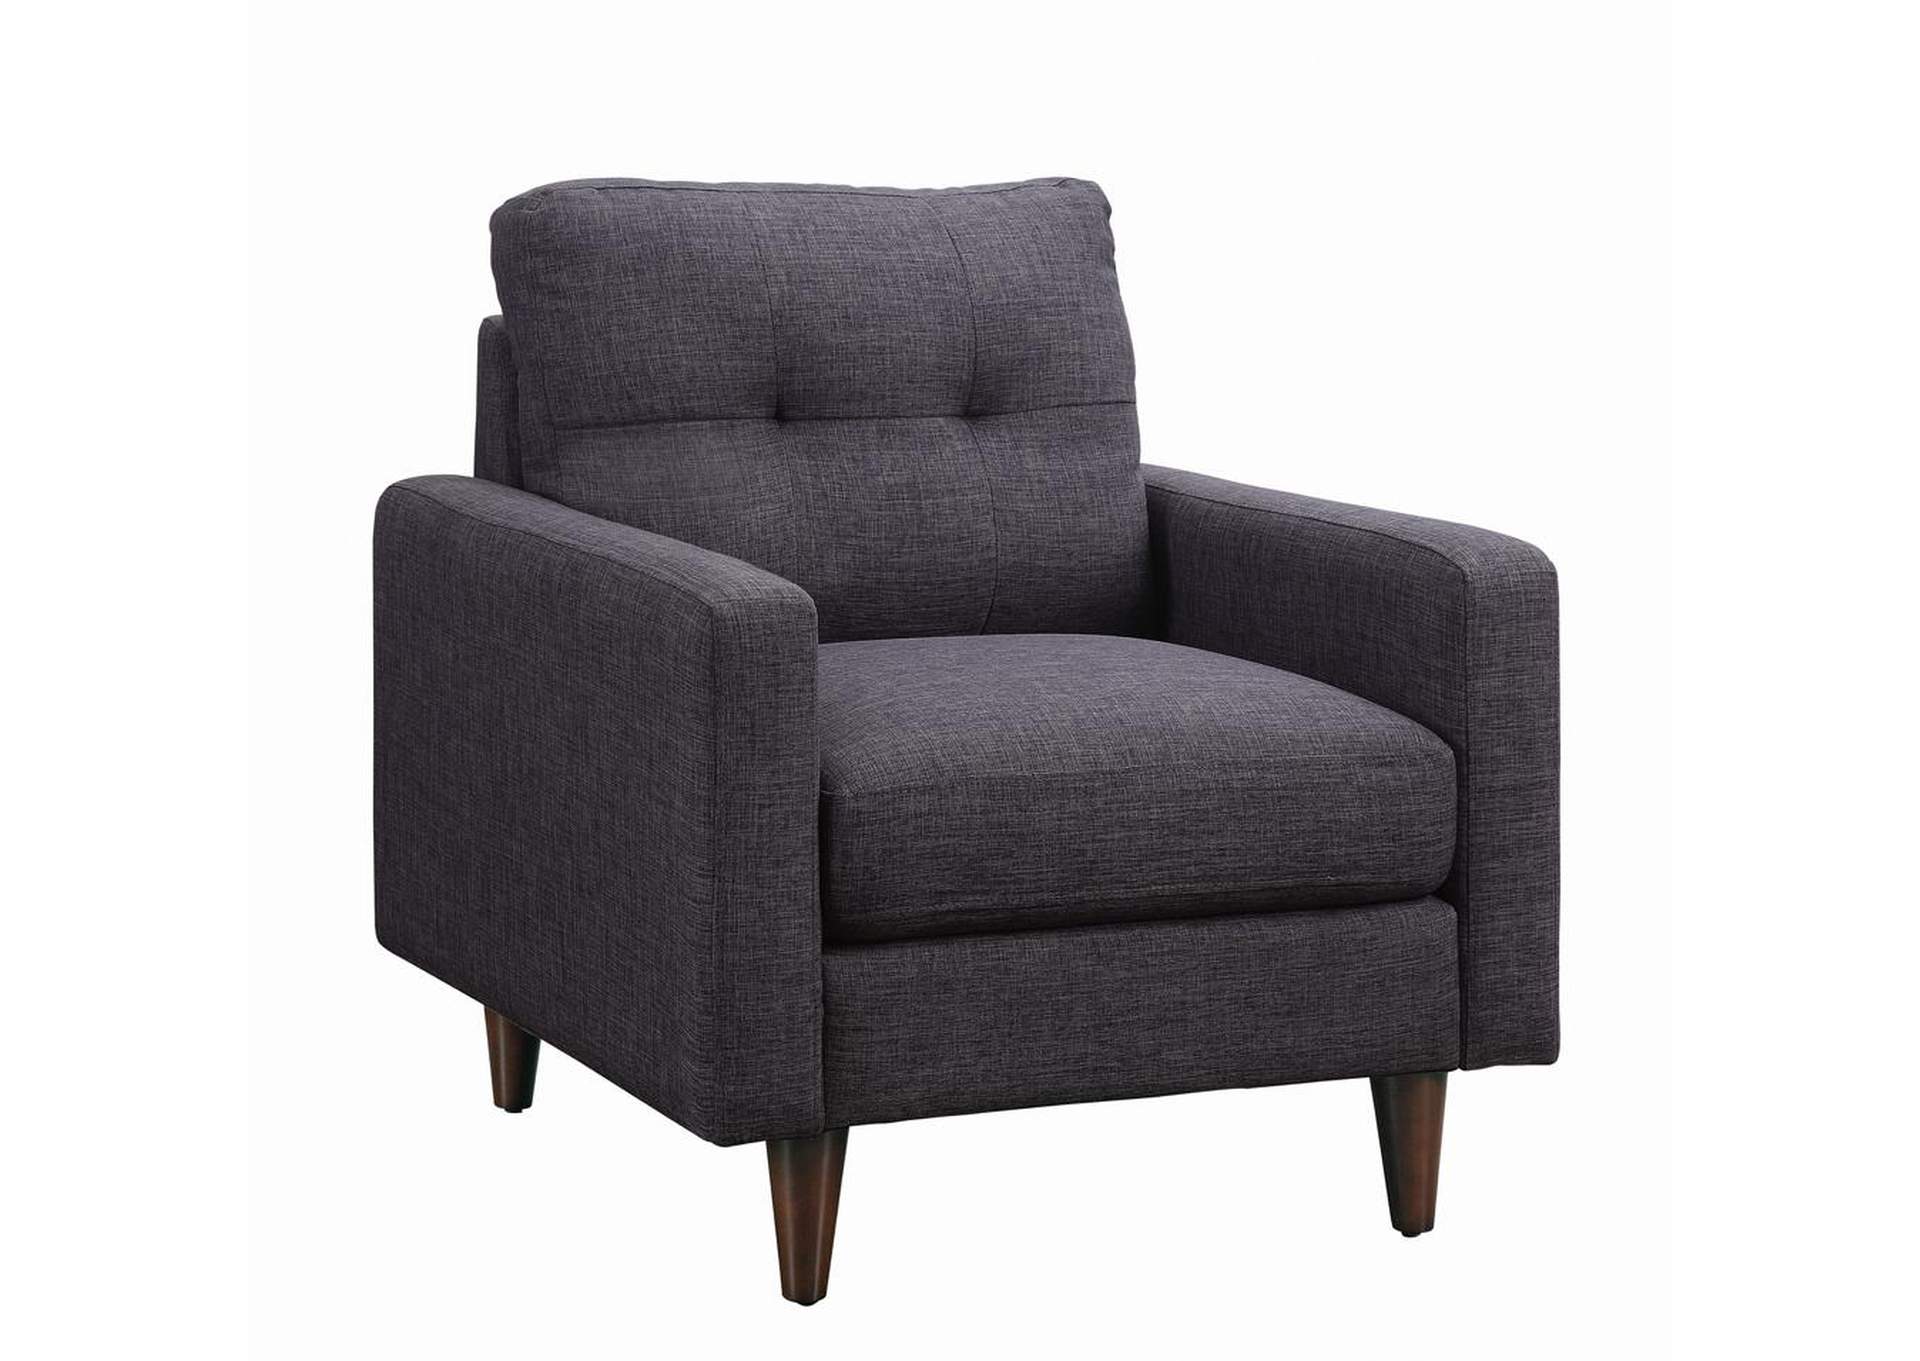 Watsonville Tufted Back Chair Grey,Coaster Furniture